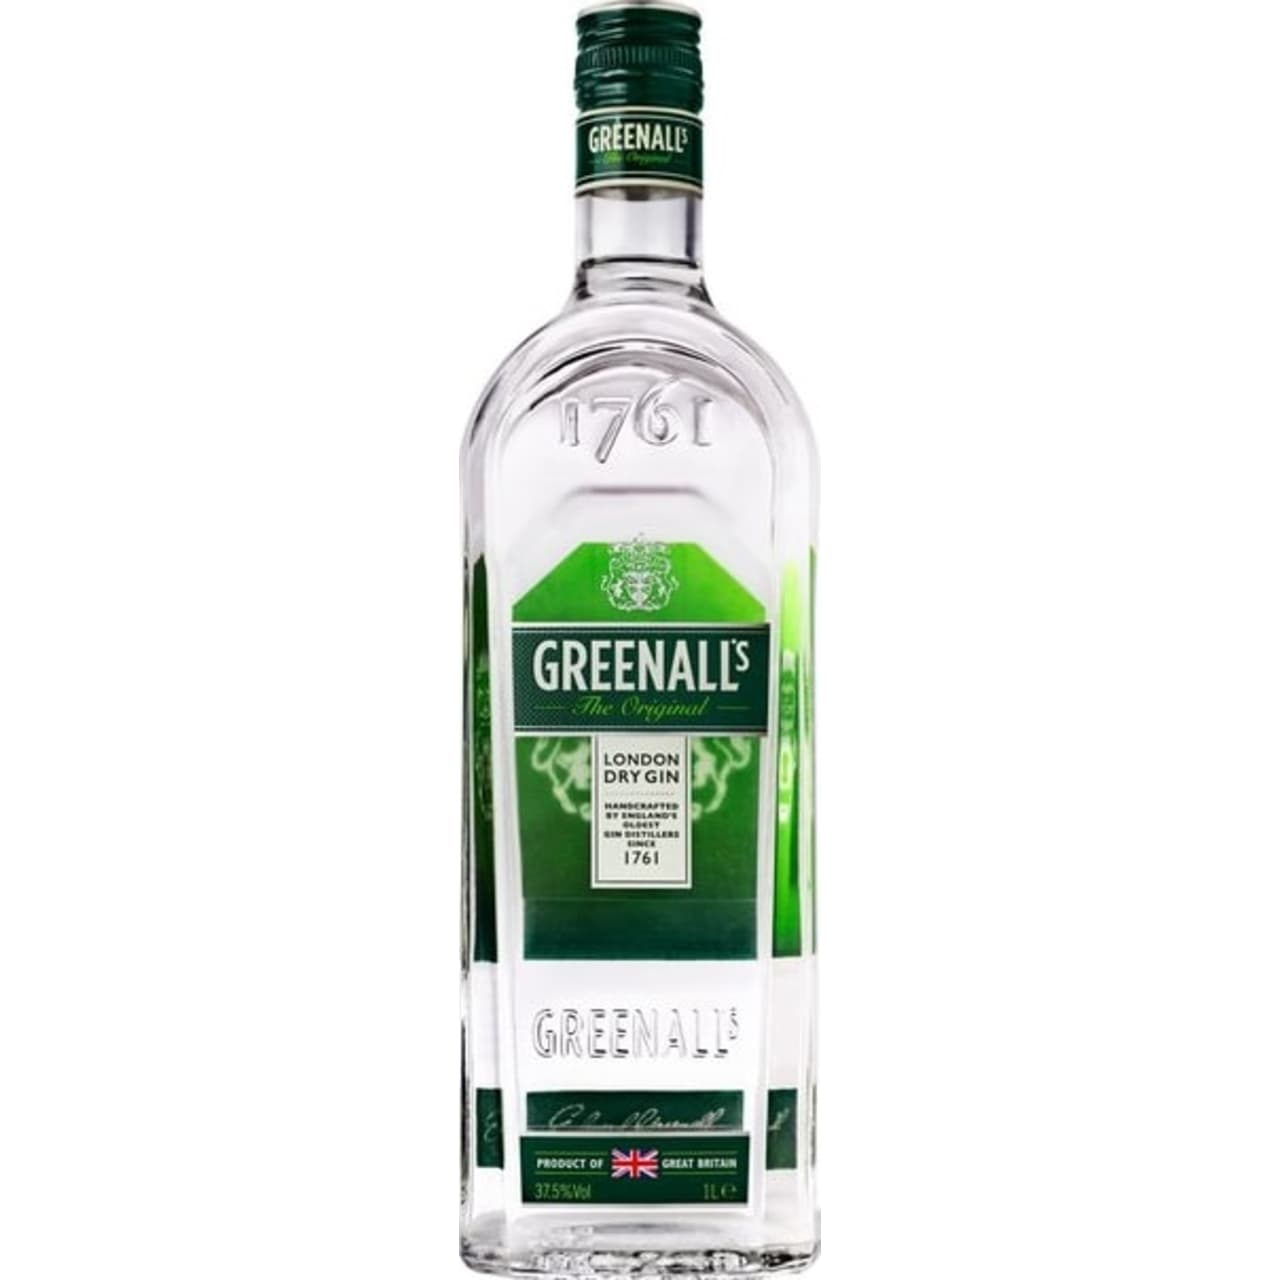 Seven generations of master distillers have passed down the Greenall’s recipe which still remains unchanged today. A blend of eight botanicals come together to create this gold award winning gin. A silky smooth with an underlying hint of spice. There is a delicate bitterness along with a subtle sweetness – a perfectly balanced gin.